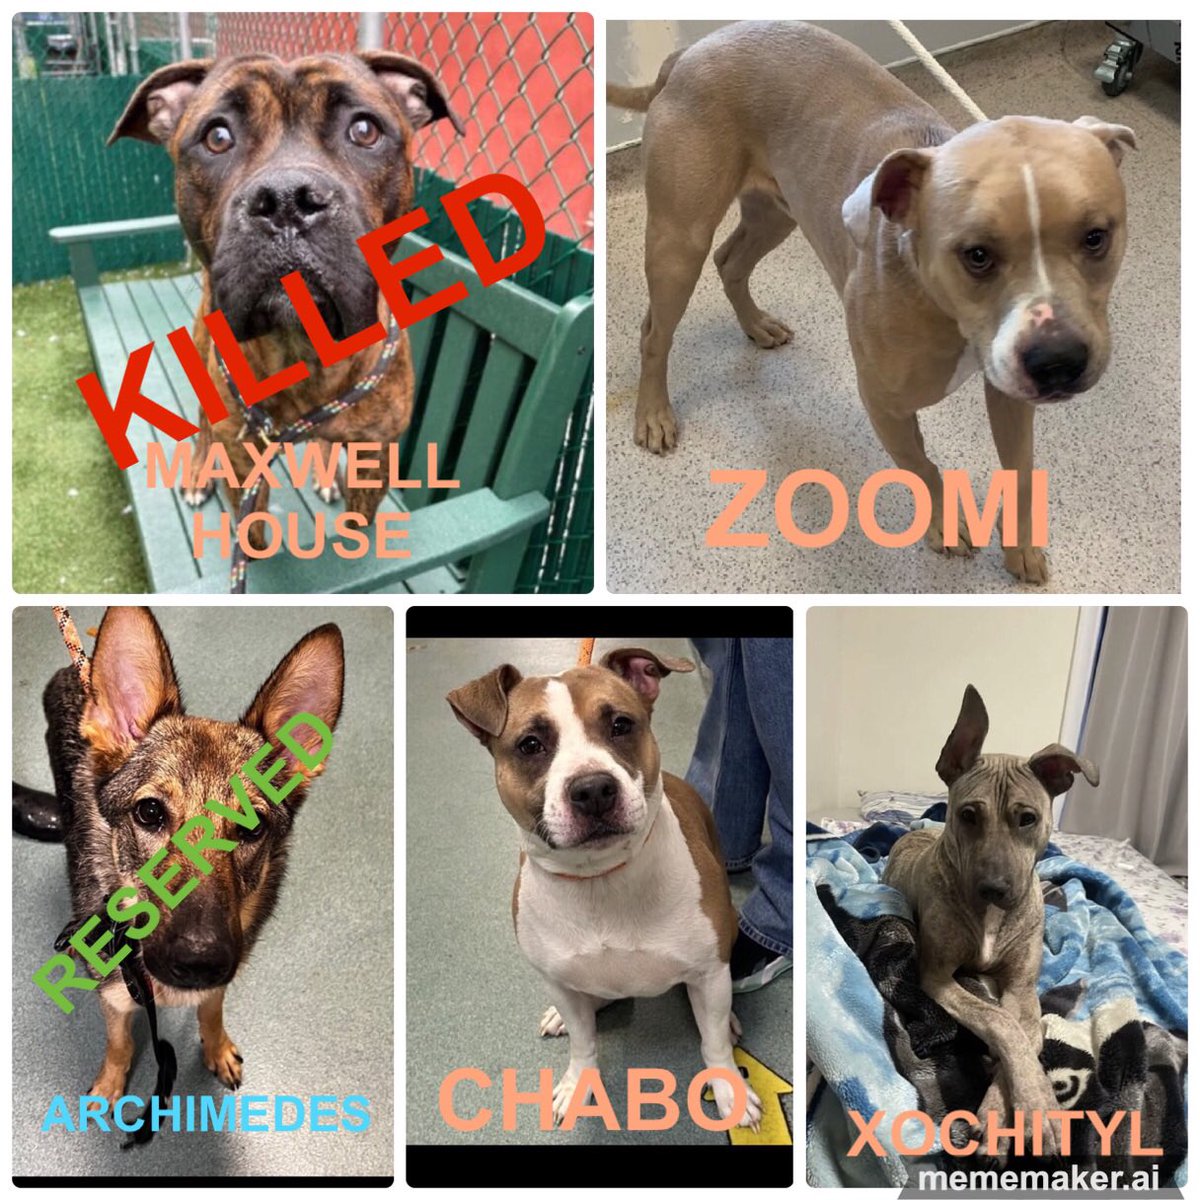 🆘🆘LAST CALL #NYCACC ACTIVE KILL ☠️COMMANDS #FostersSavesLives ❤️‍🩹ZOOMI 3yrs ❤️‍🩹CHABO 4yrs ❤️‍🩹XOCHITYL 1yr PLEASE #RT #PLEDGE #FOSTER 📧nycdogslivesmatter@gmail.com DM @notthesameone2